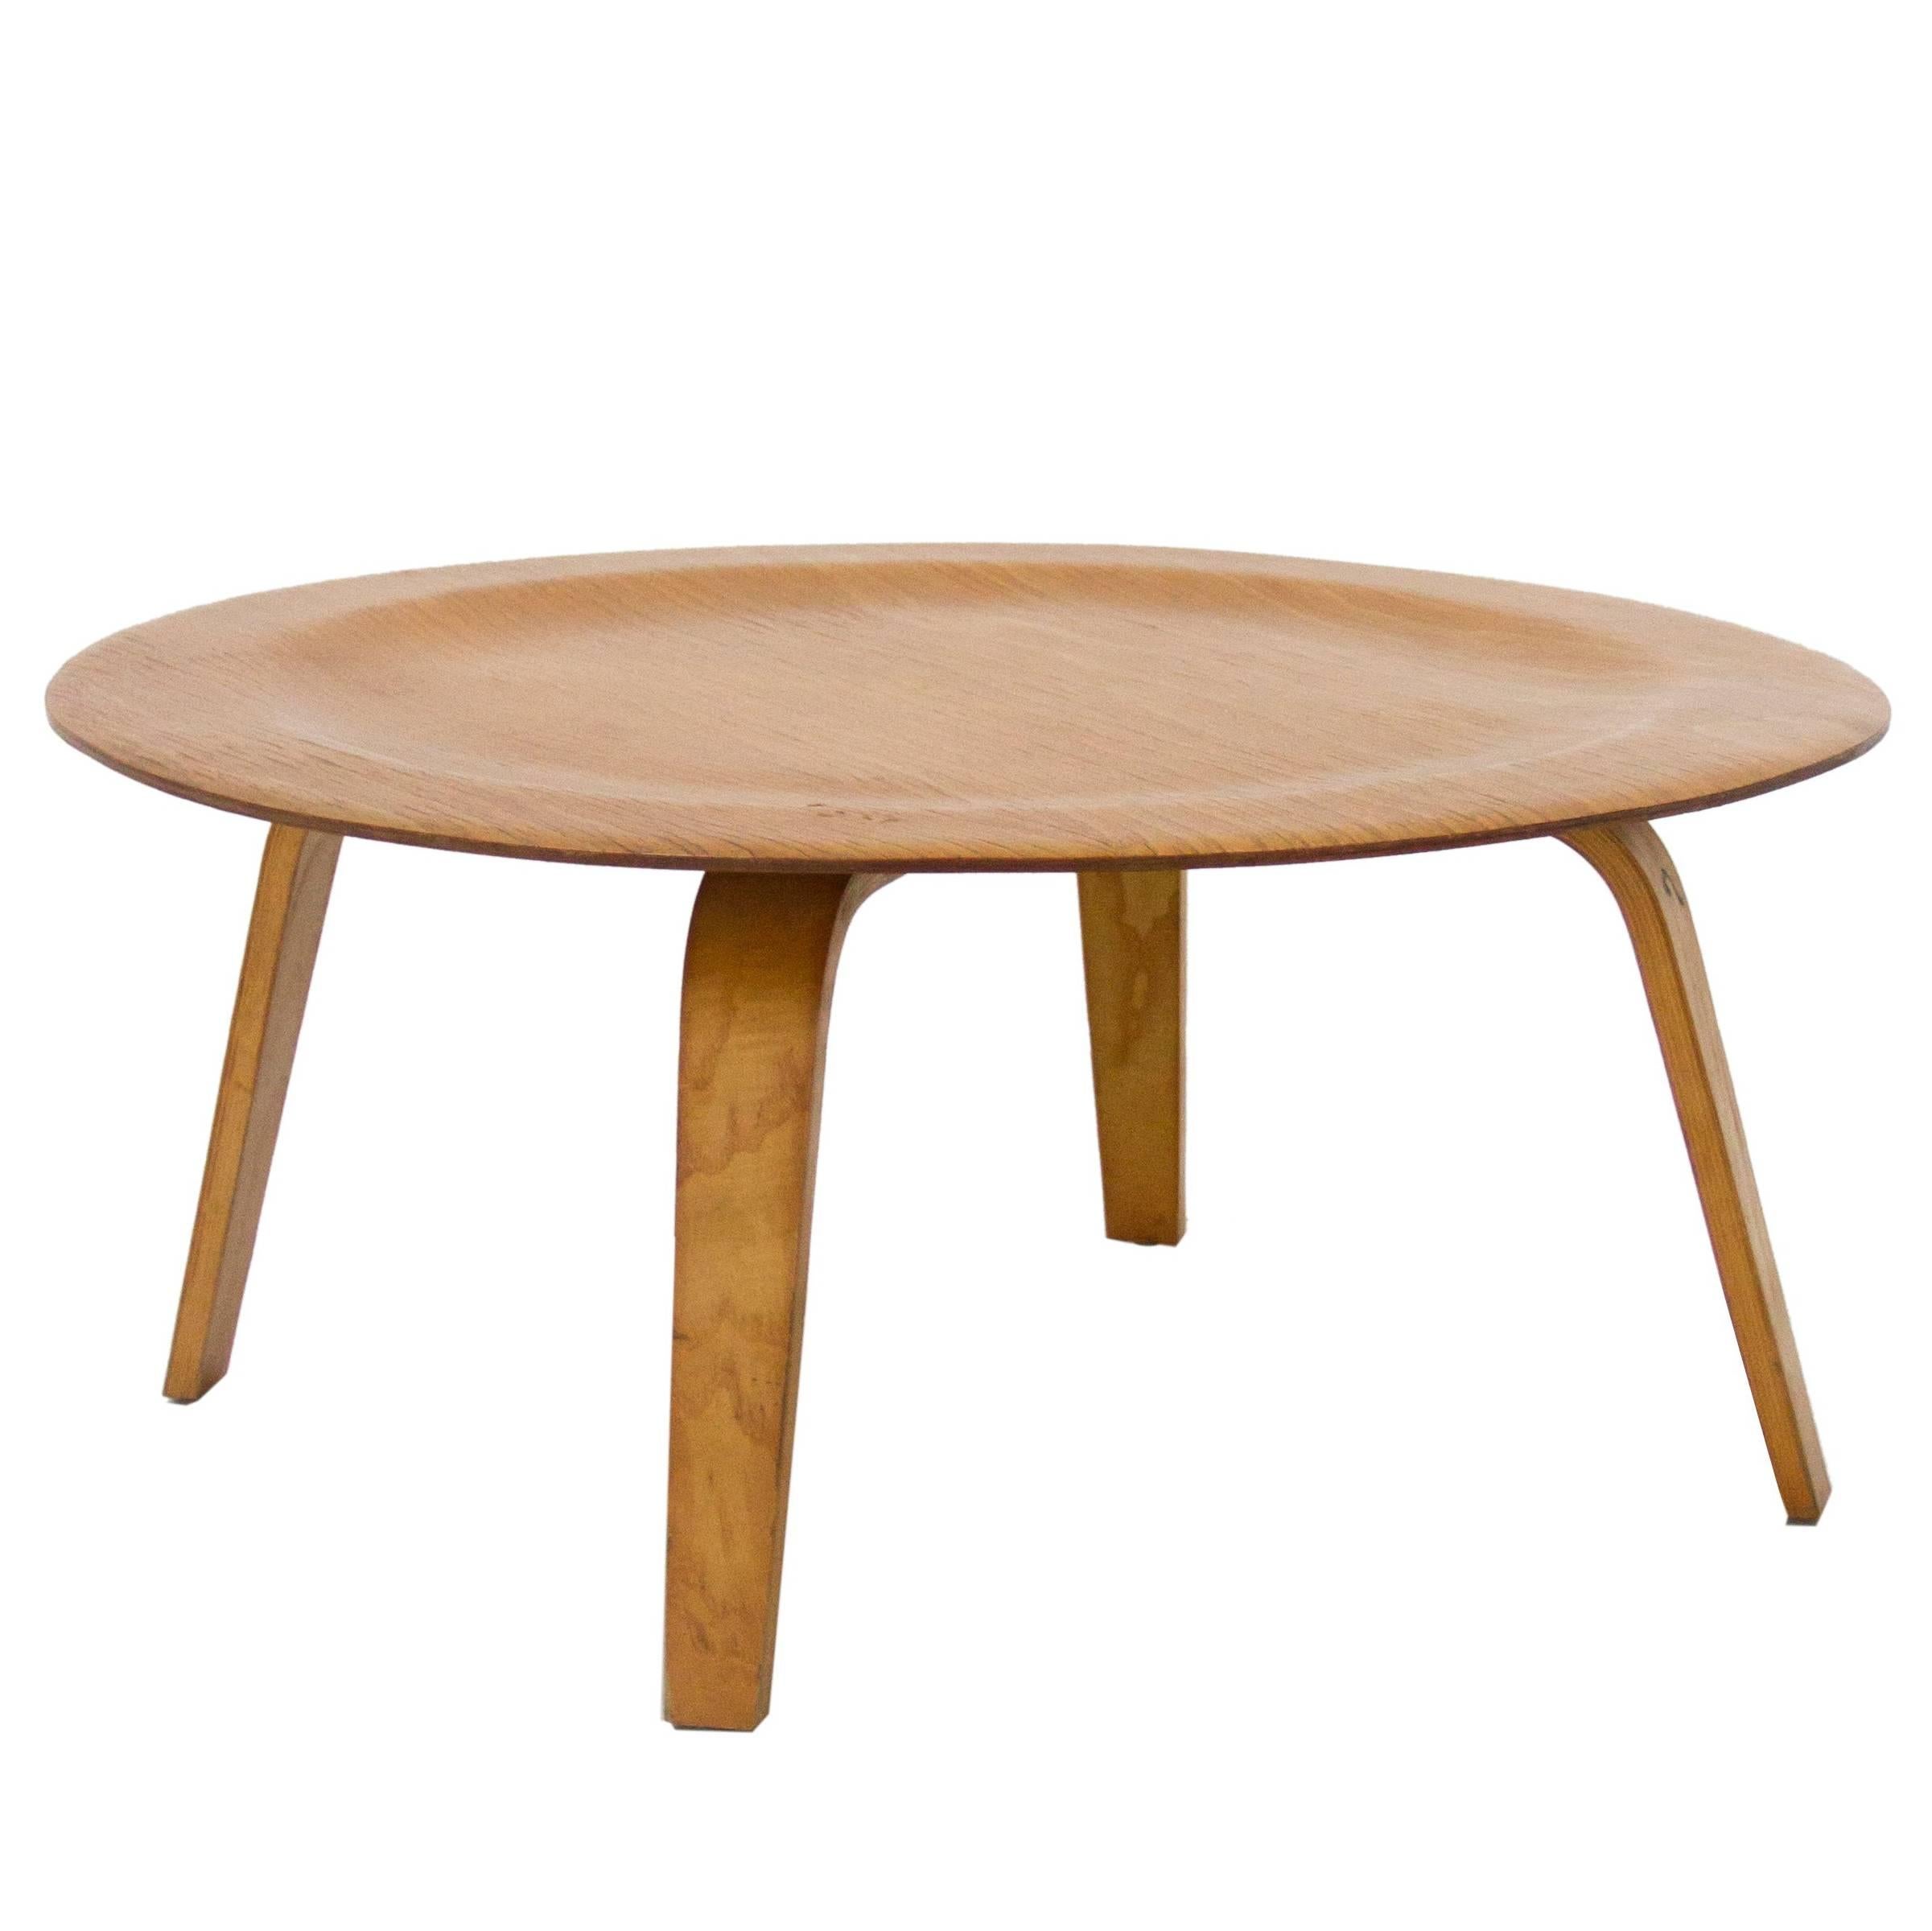 Charles & Ray Eames Coffee Table Model CTW in Plywood, 1940s United States